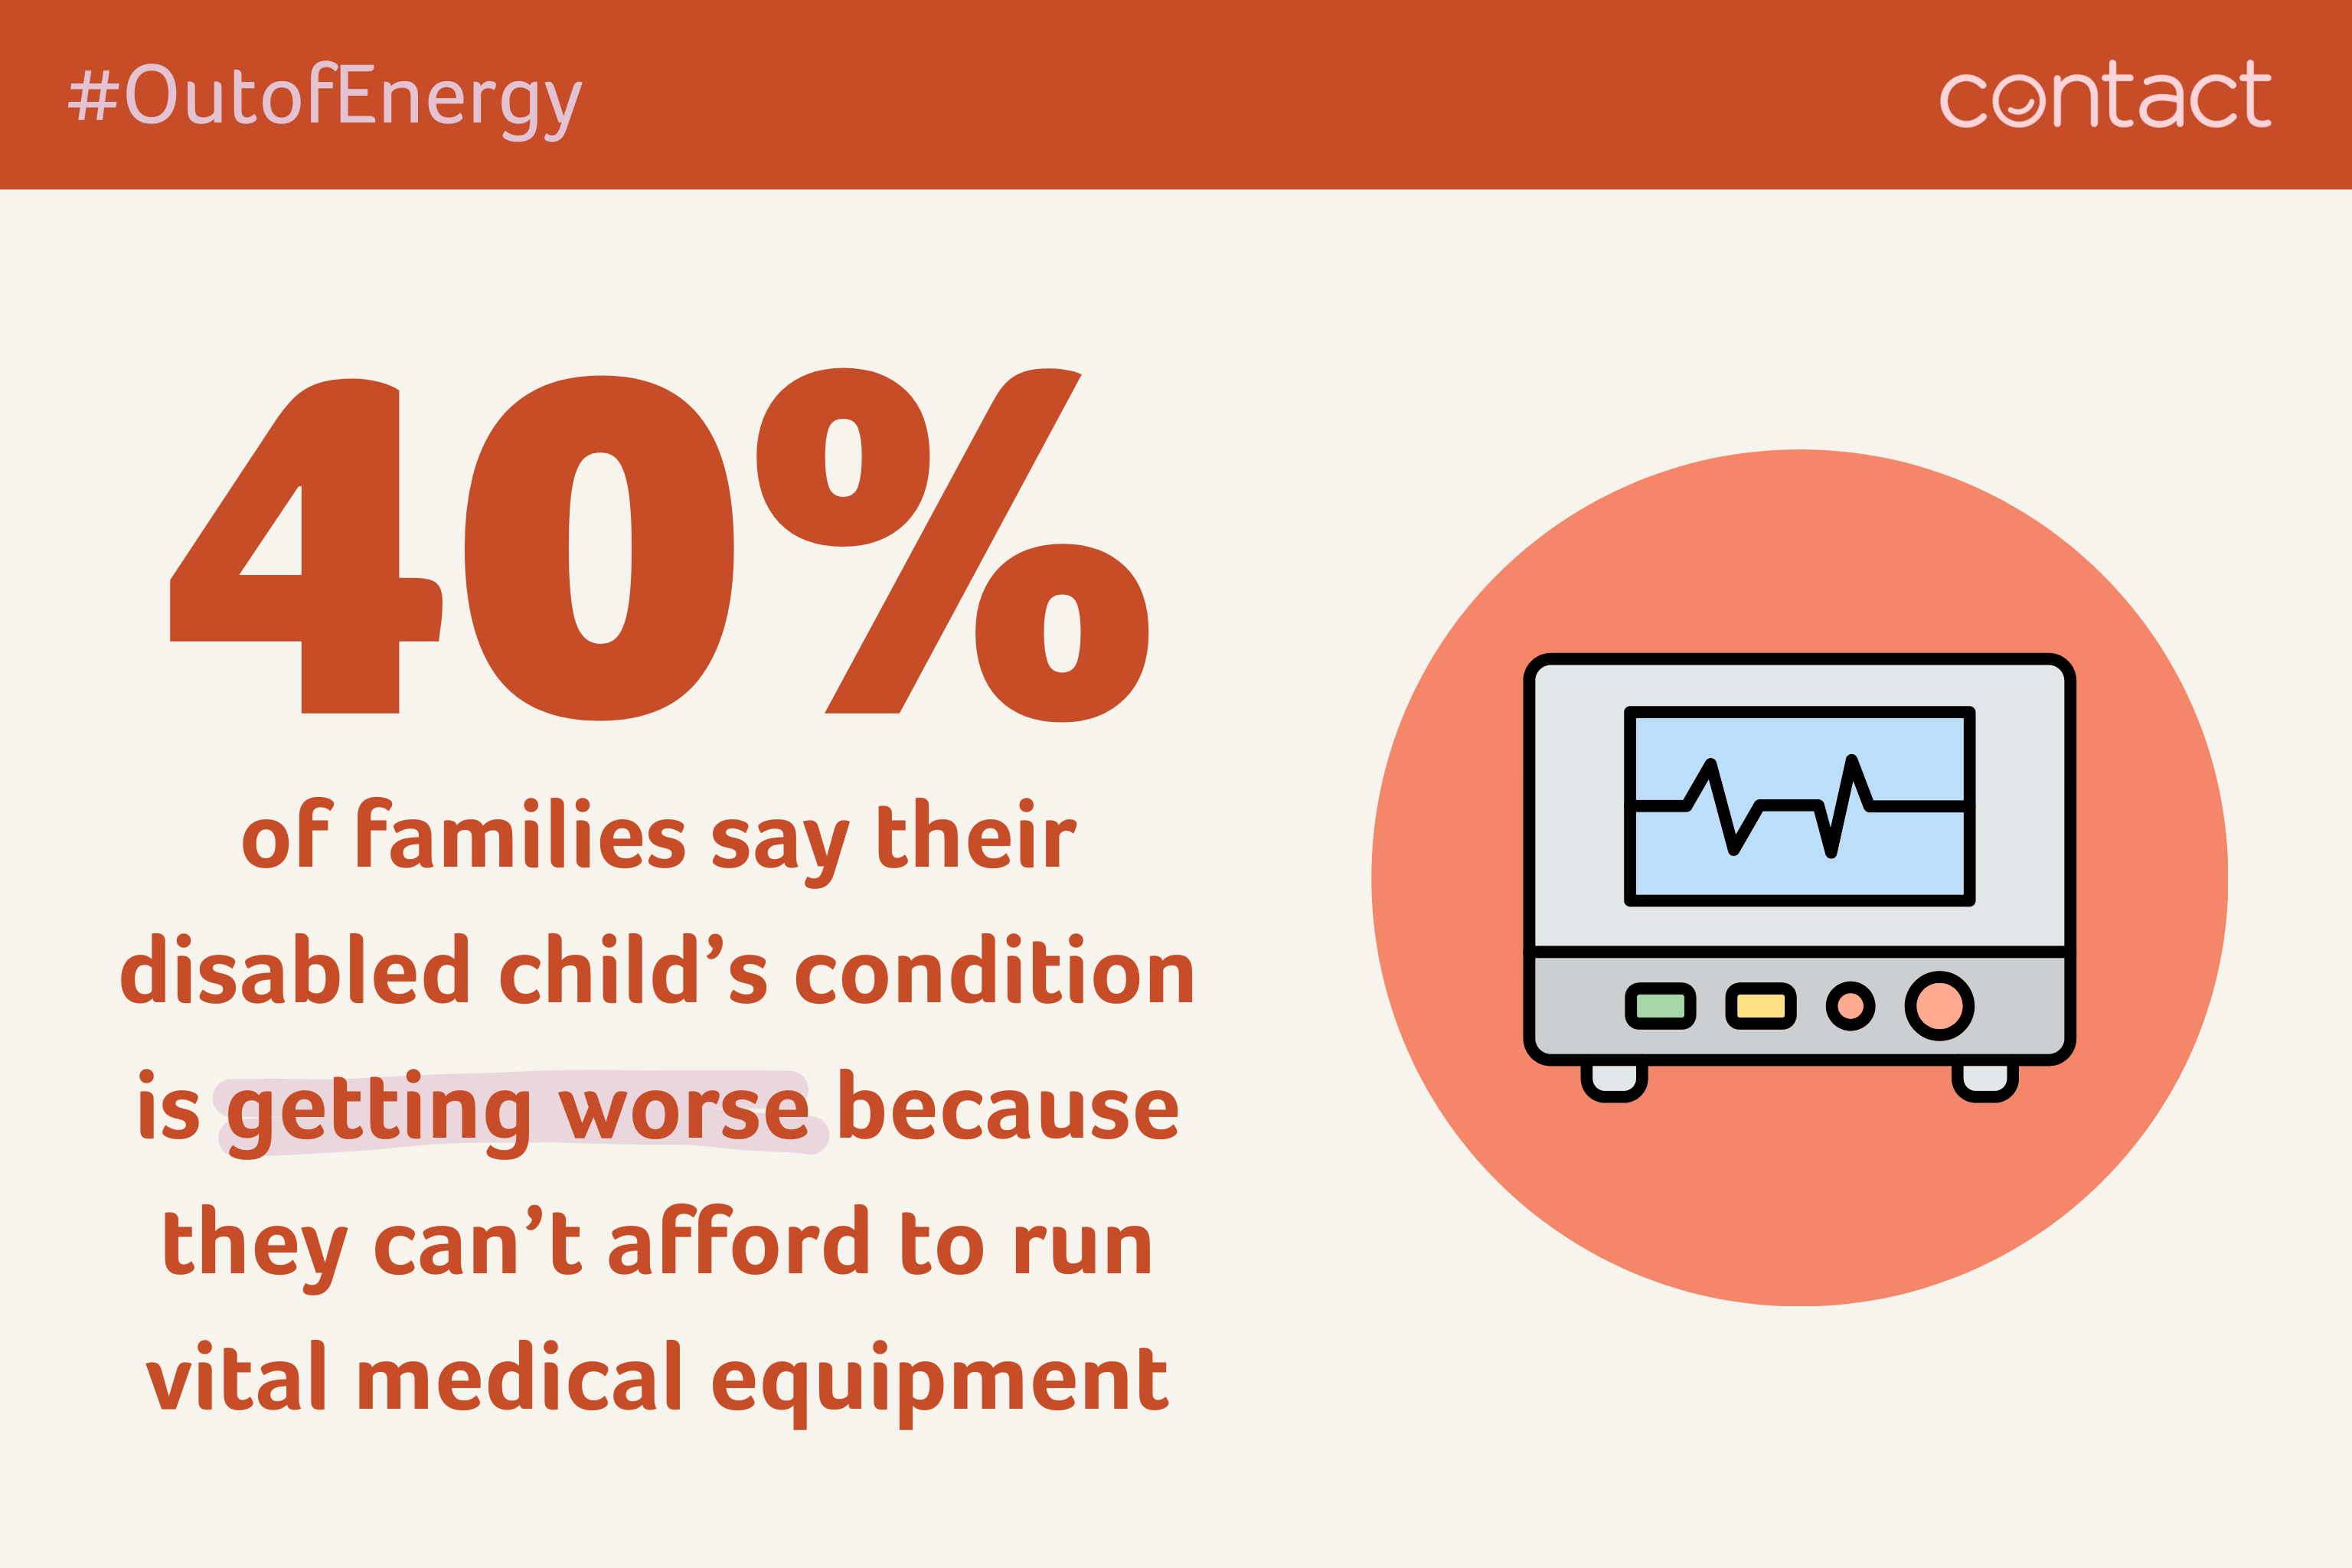 40% of families say their child's condition is getting worse because they can't afford to run medical equipment